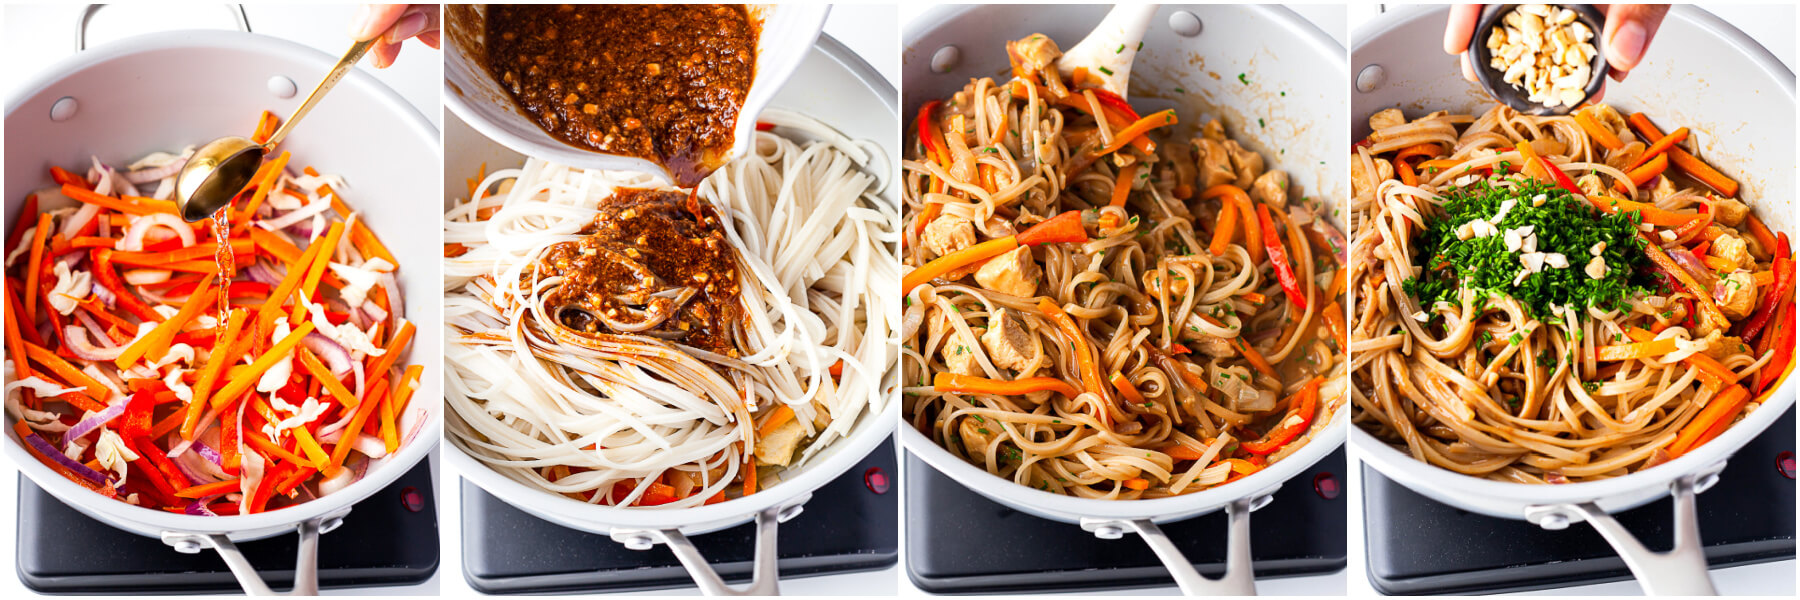 A series of process images showing how to make spicy peanut noodles.